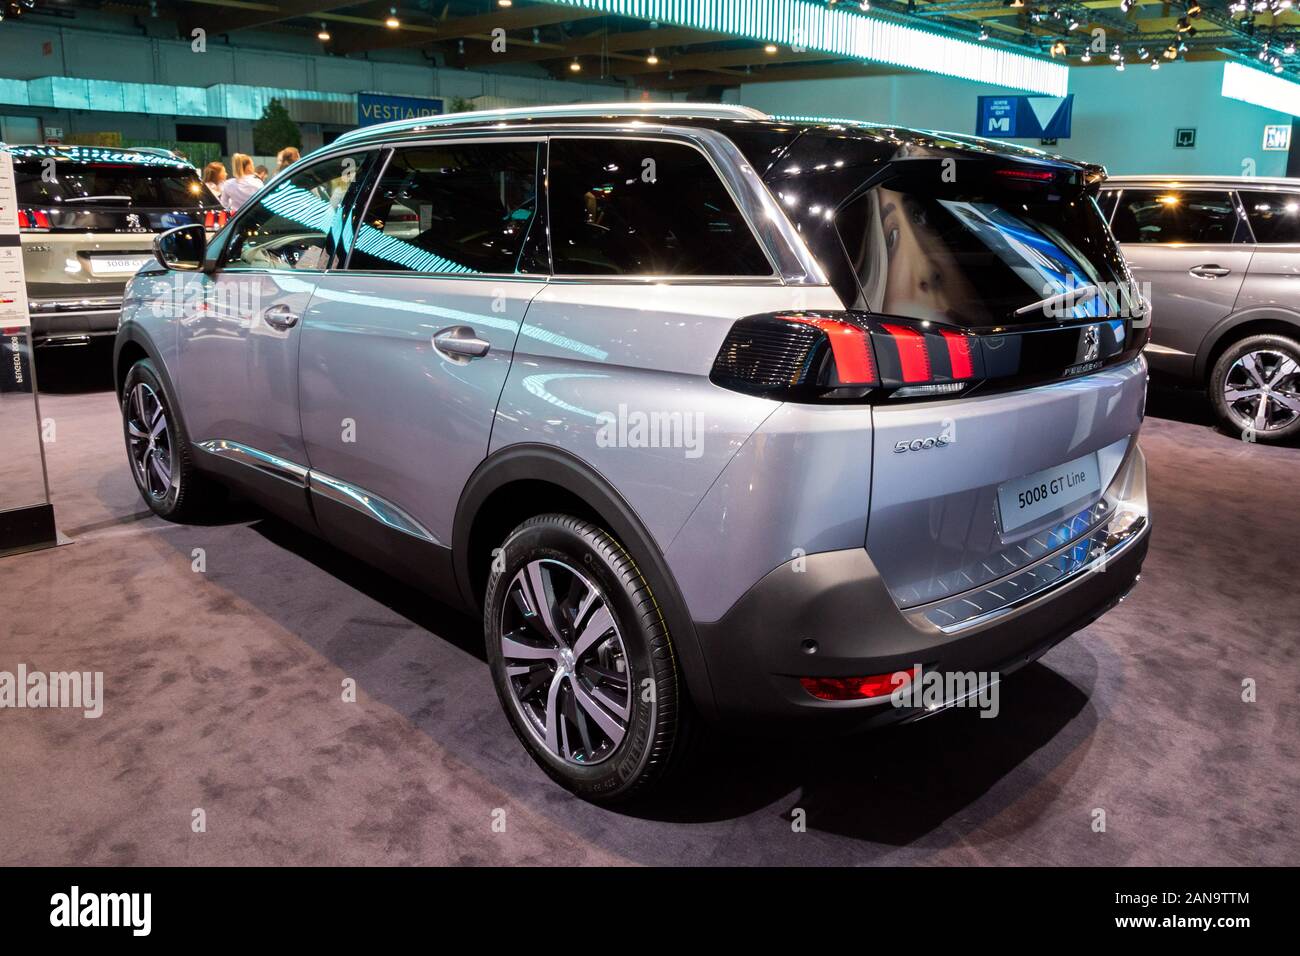 BRUSSELS - JAN 9, 2020: New Peugeot 5008 GT car model presented at the Brussels Autosalon 2020 Motor Show. Stock Photo